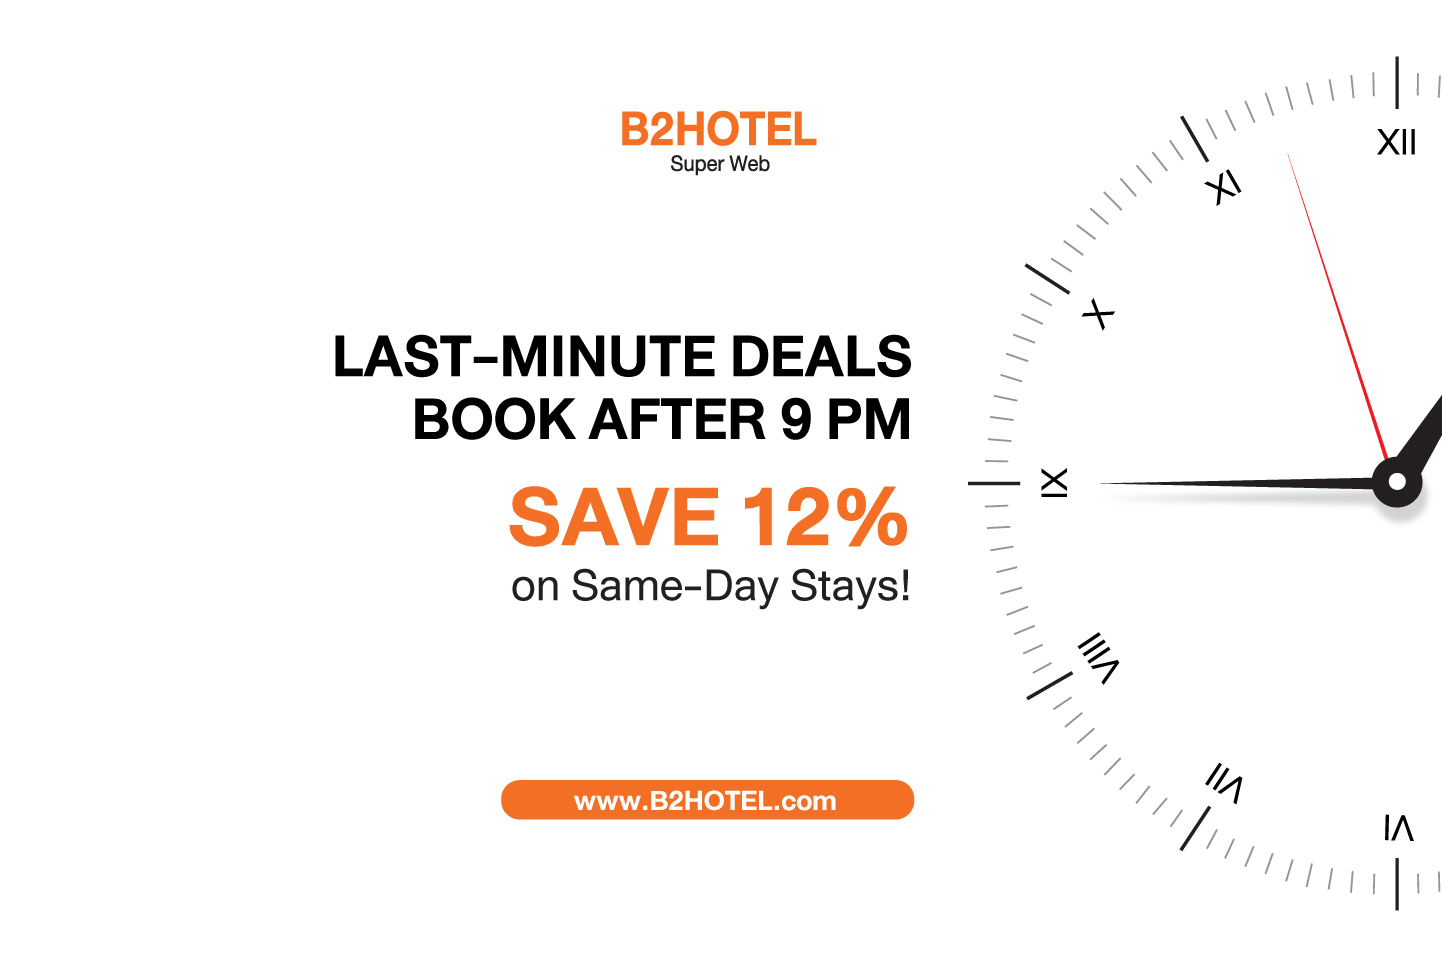 Last-Minute Deals Book After 9 PM, Save 12%! On Same-Day Stays!